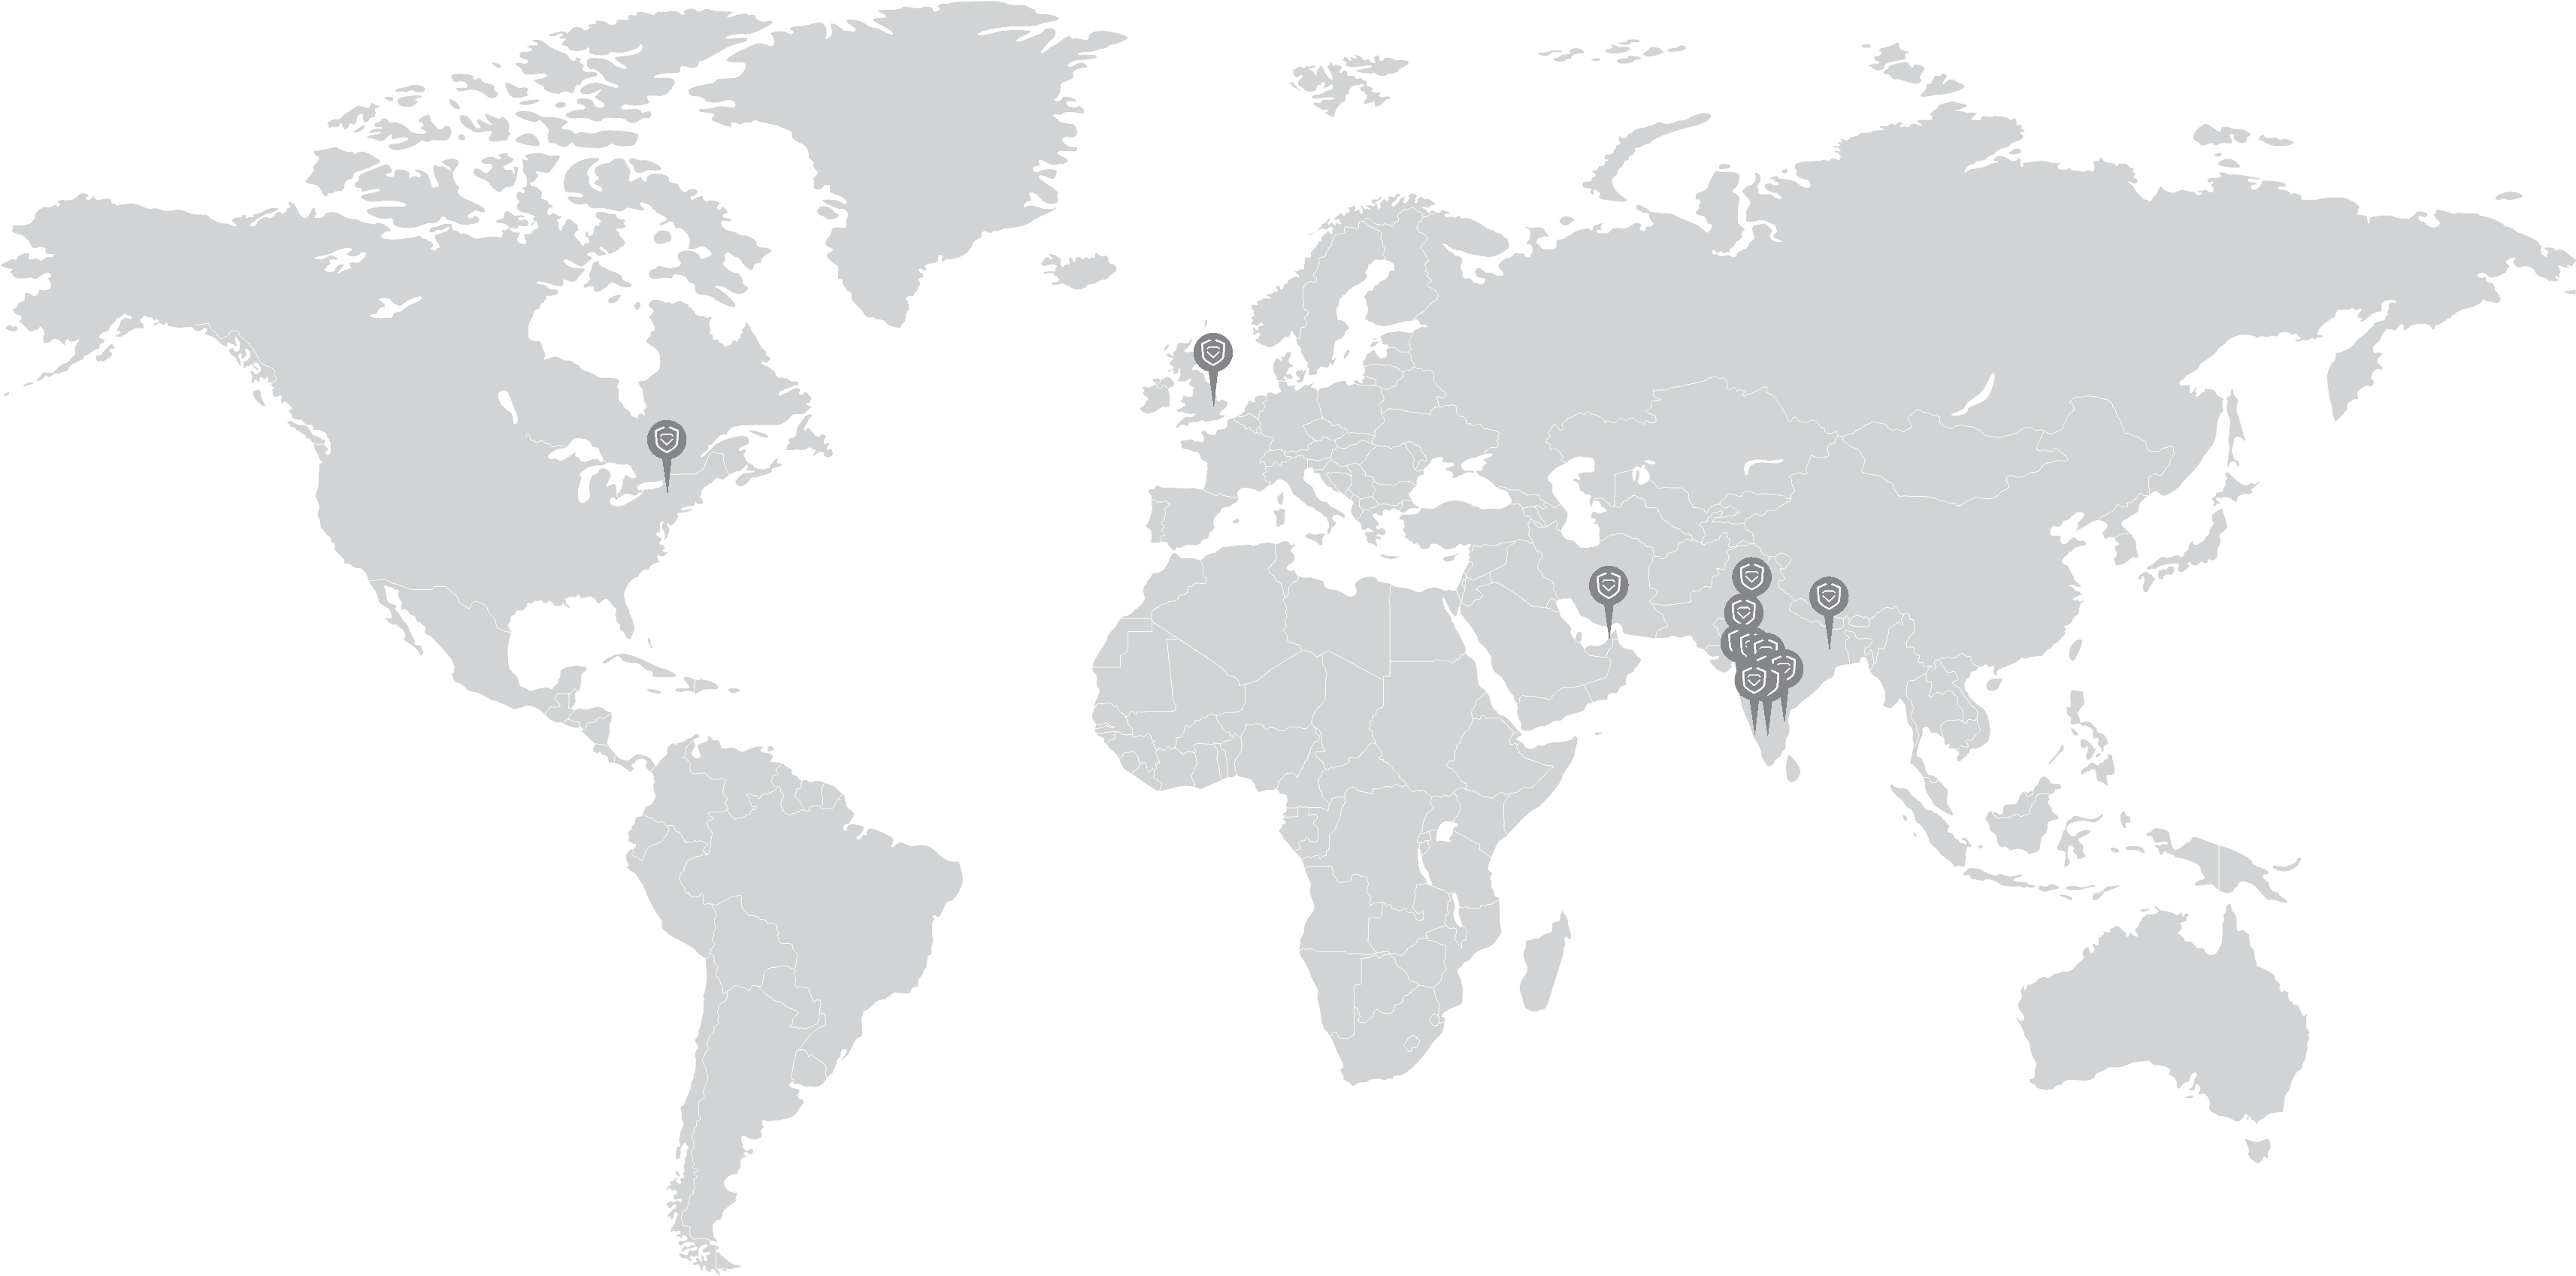 This image is used to show the global appearance of SGL labs. SDL labs has 16 centres operating across the globe.